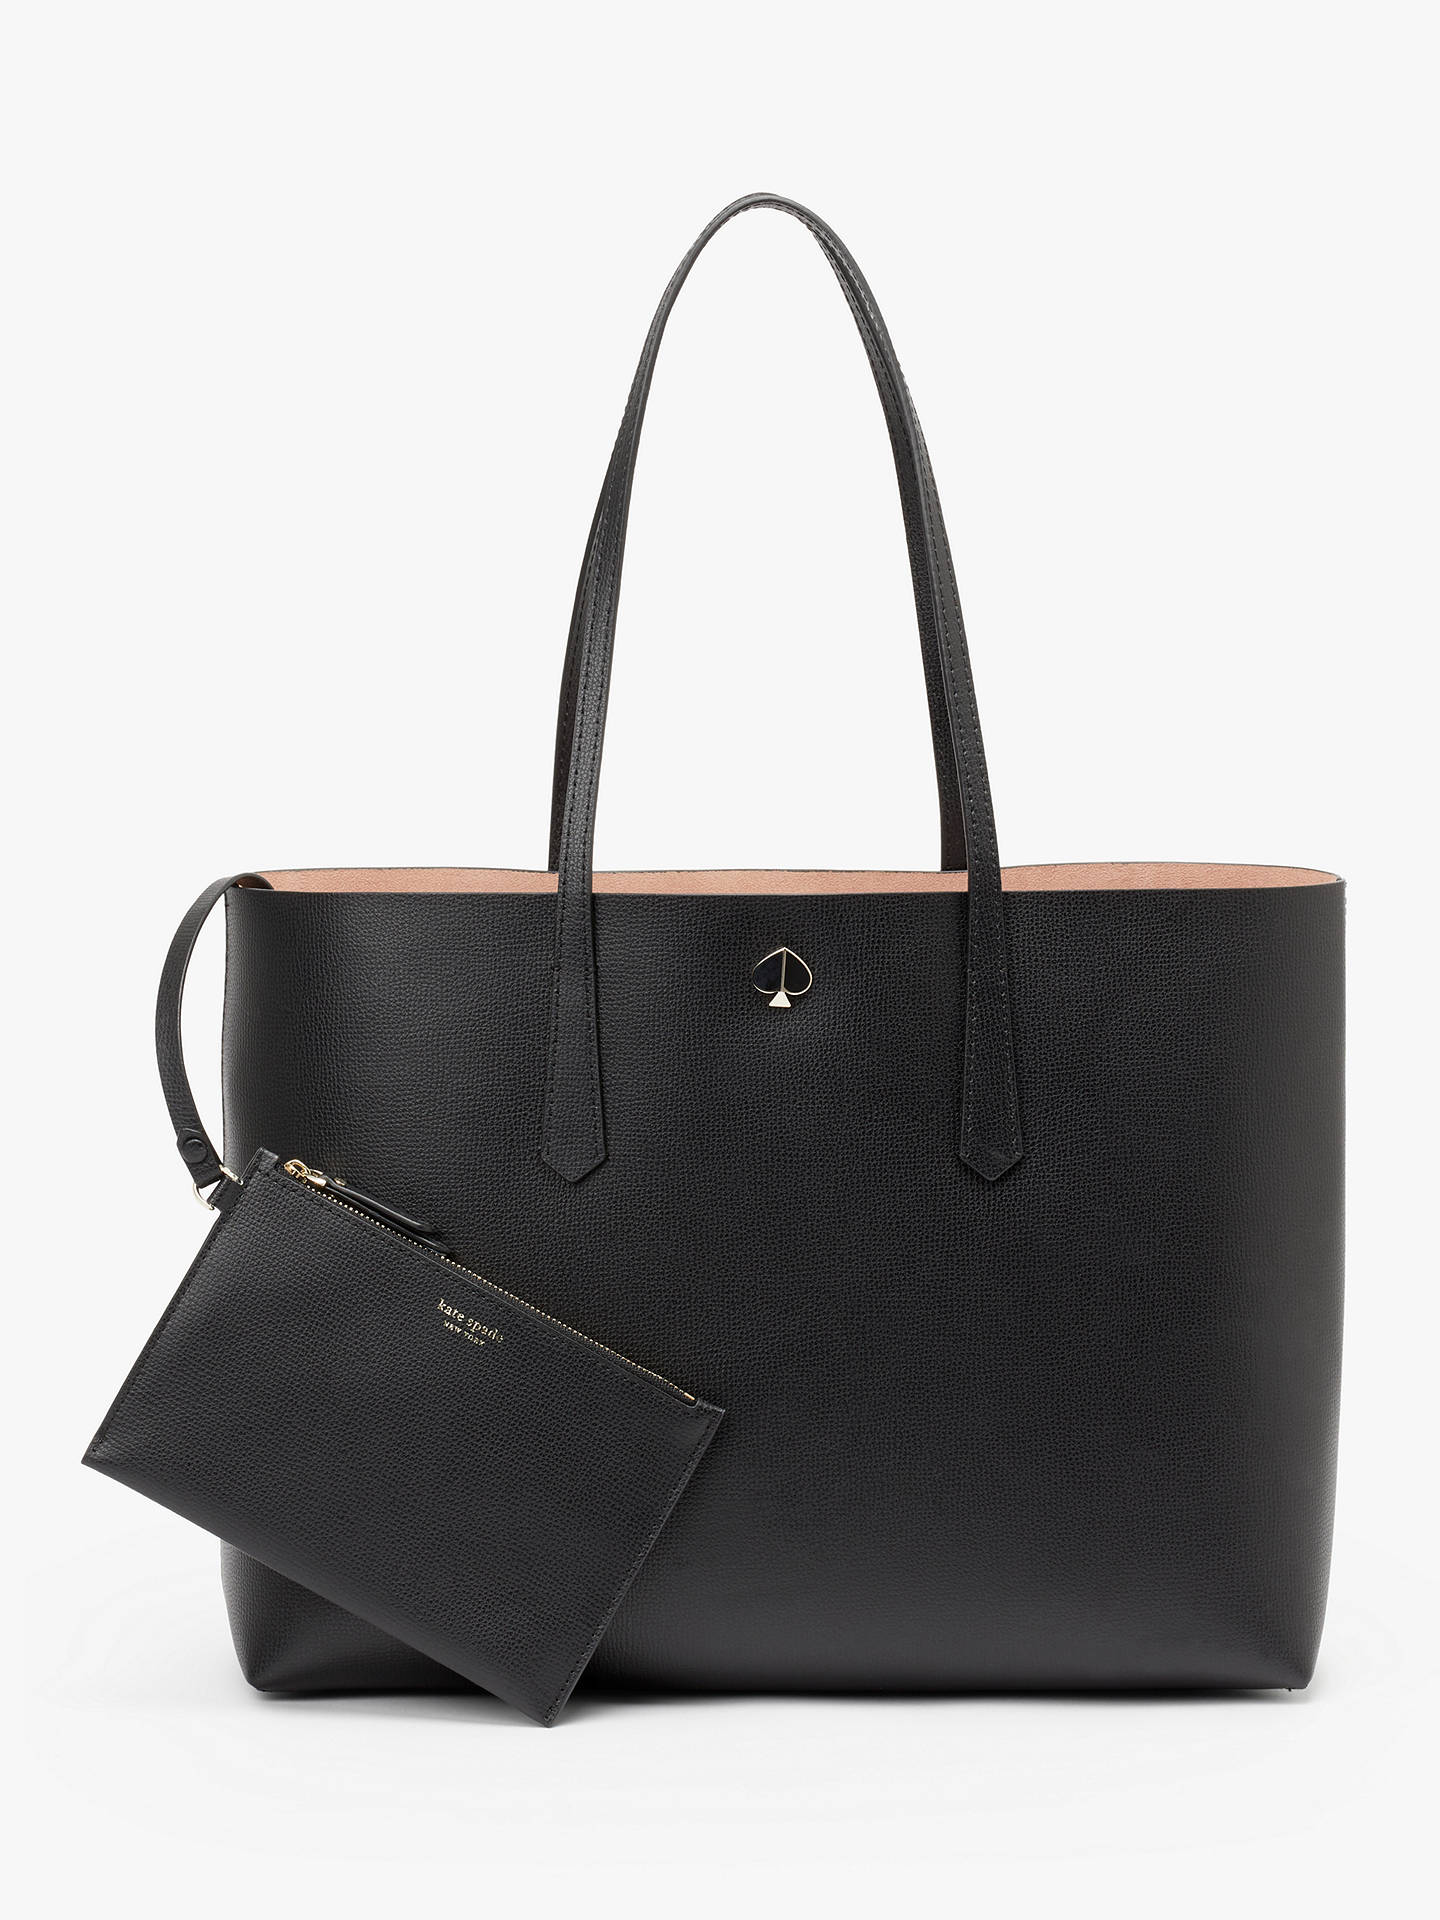 kate spade new york Molly Leather Large Tote Bag at John Lewis & Partners